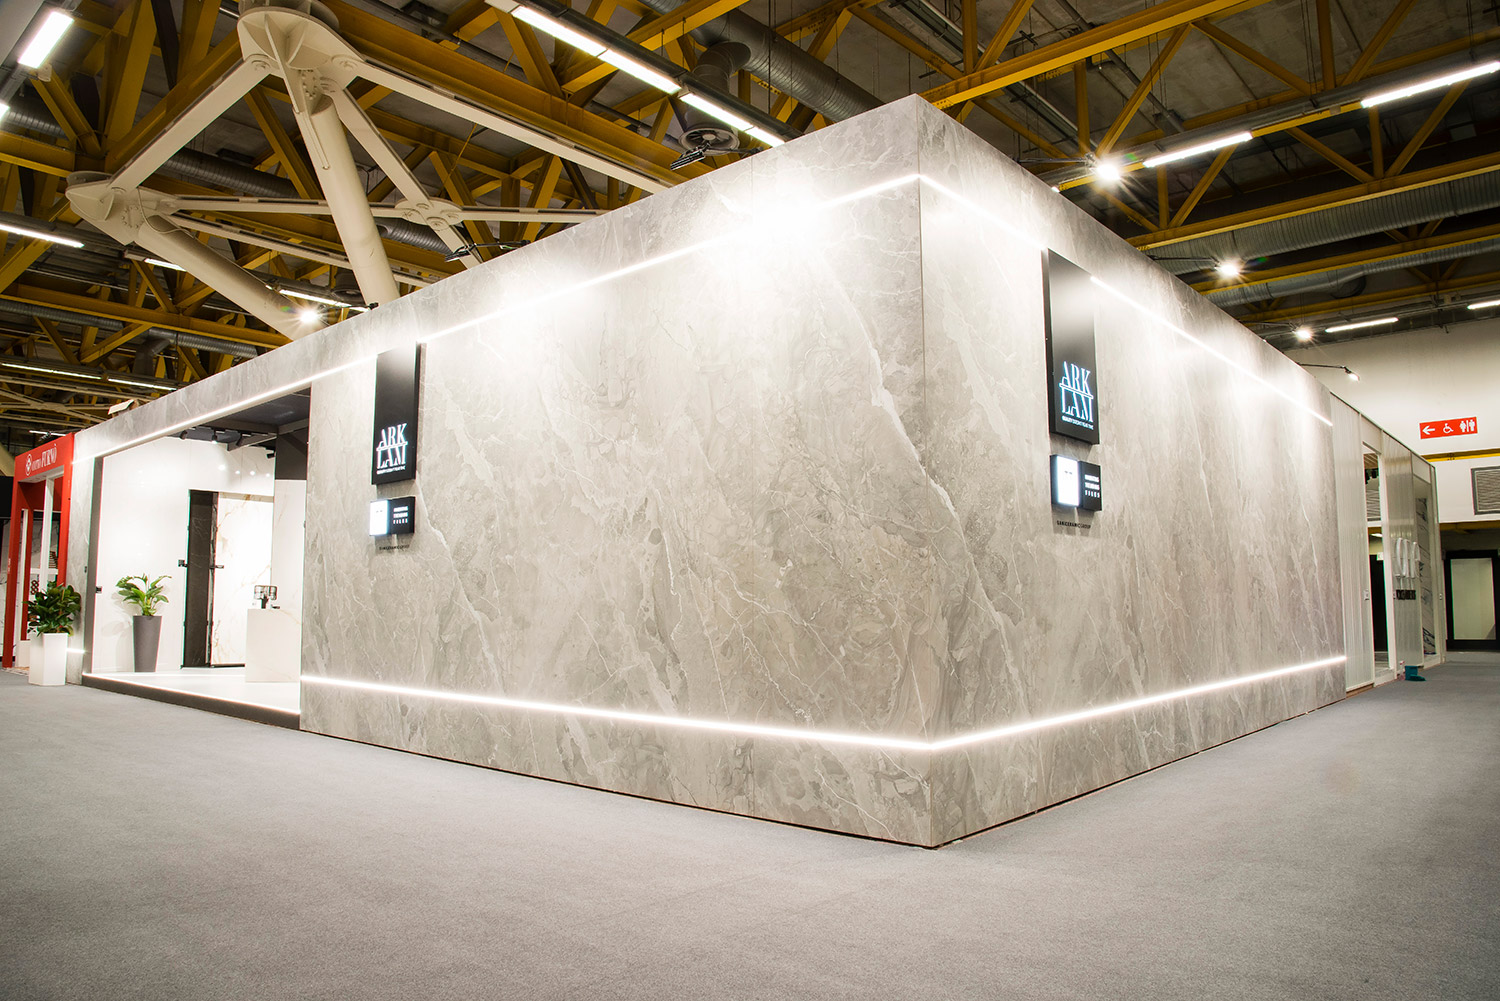 Cersaie 2021: professionals choose Arklam as a cutting-edge large format solution